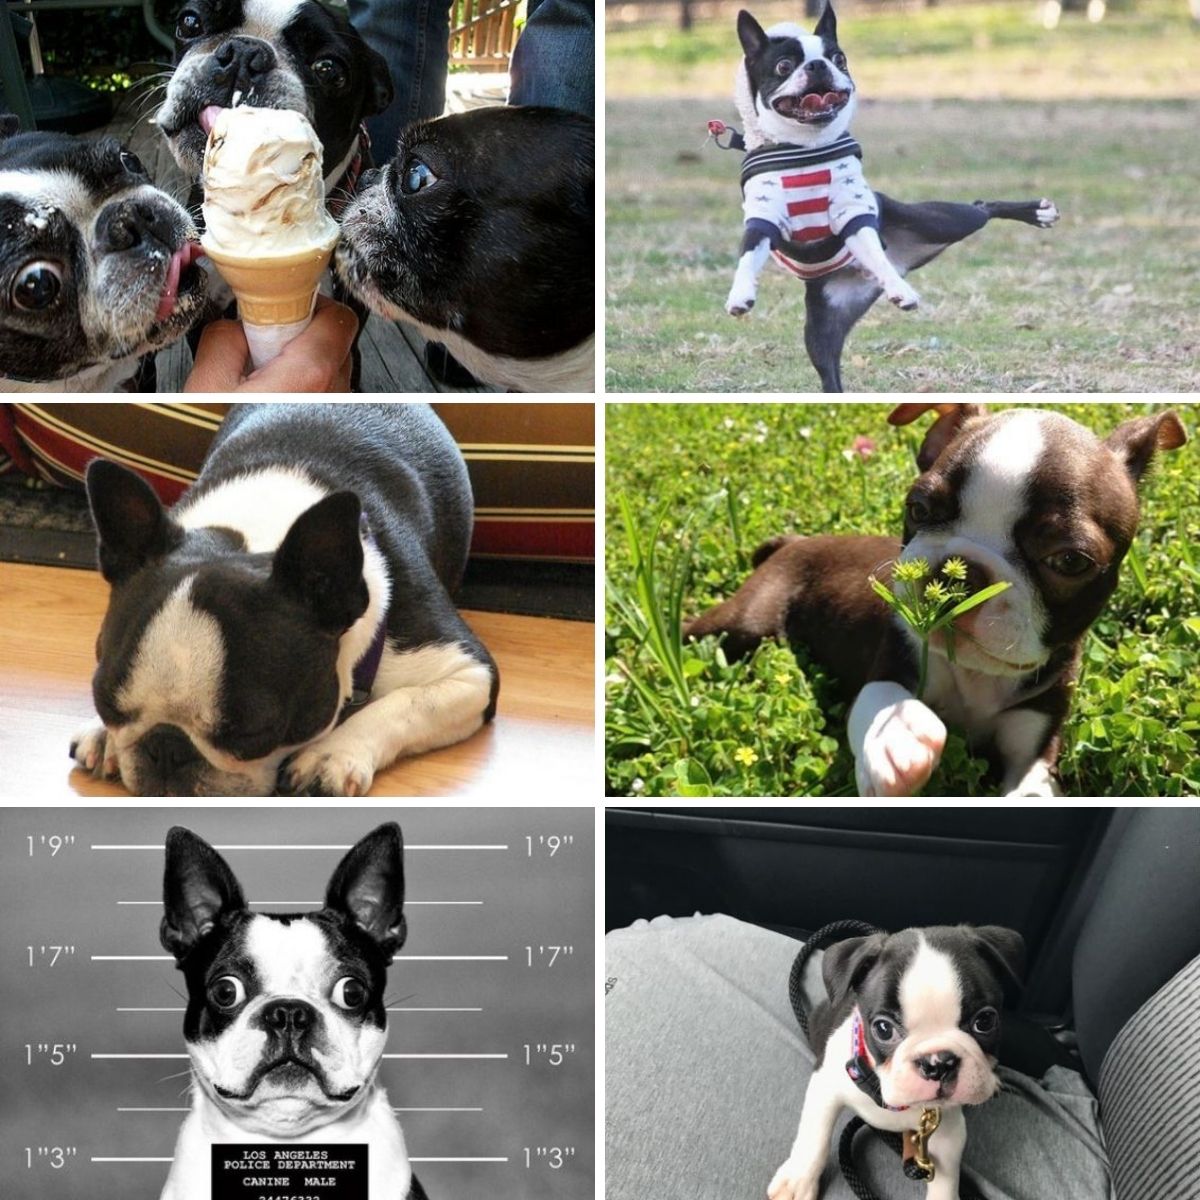 25 Reasons Why You Should Never Own Boston Terriers - The Paws